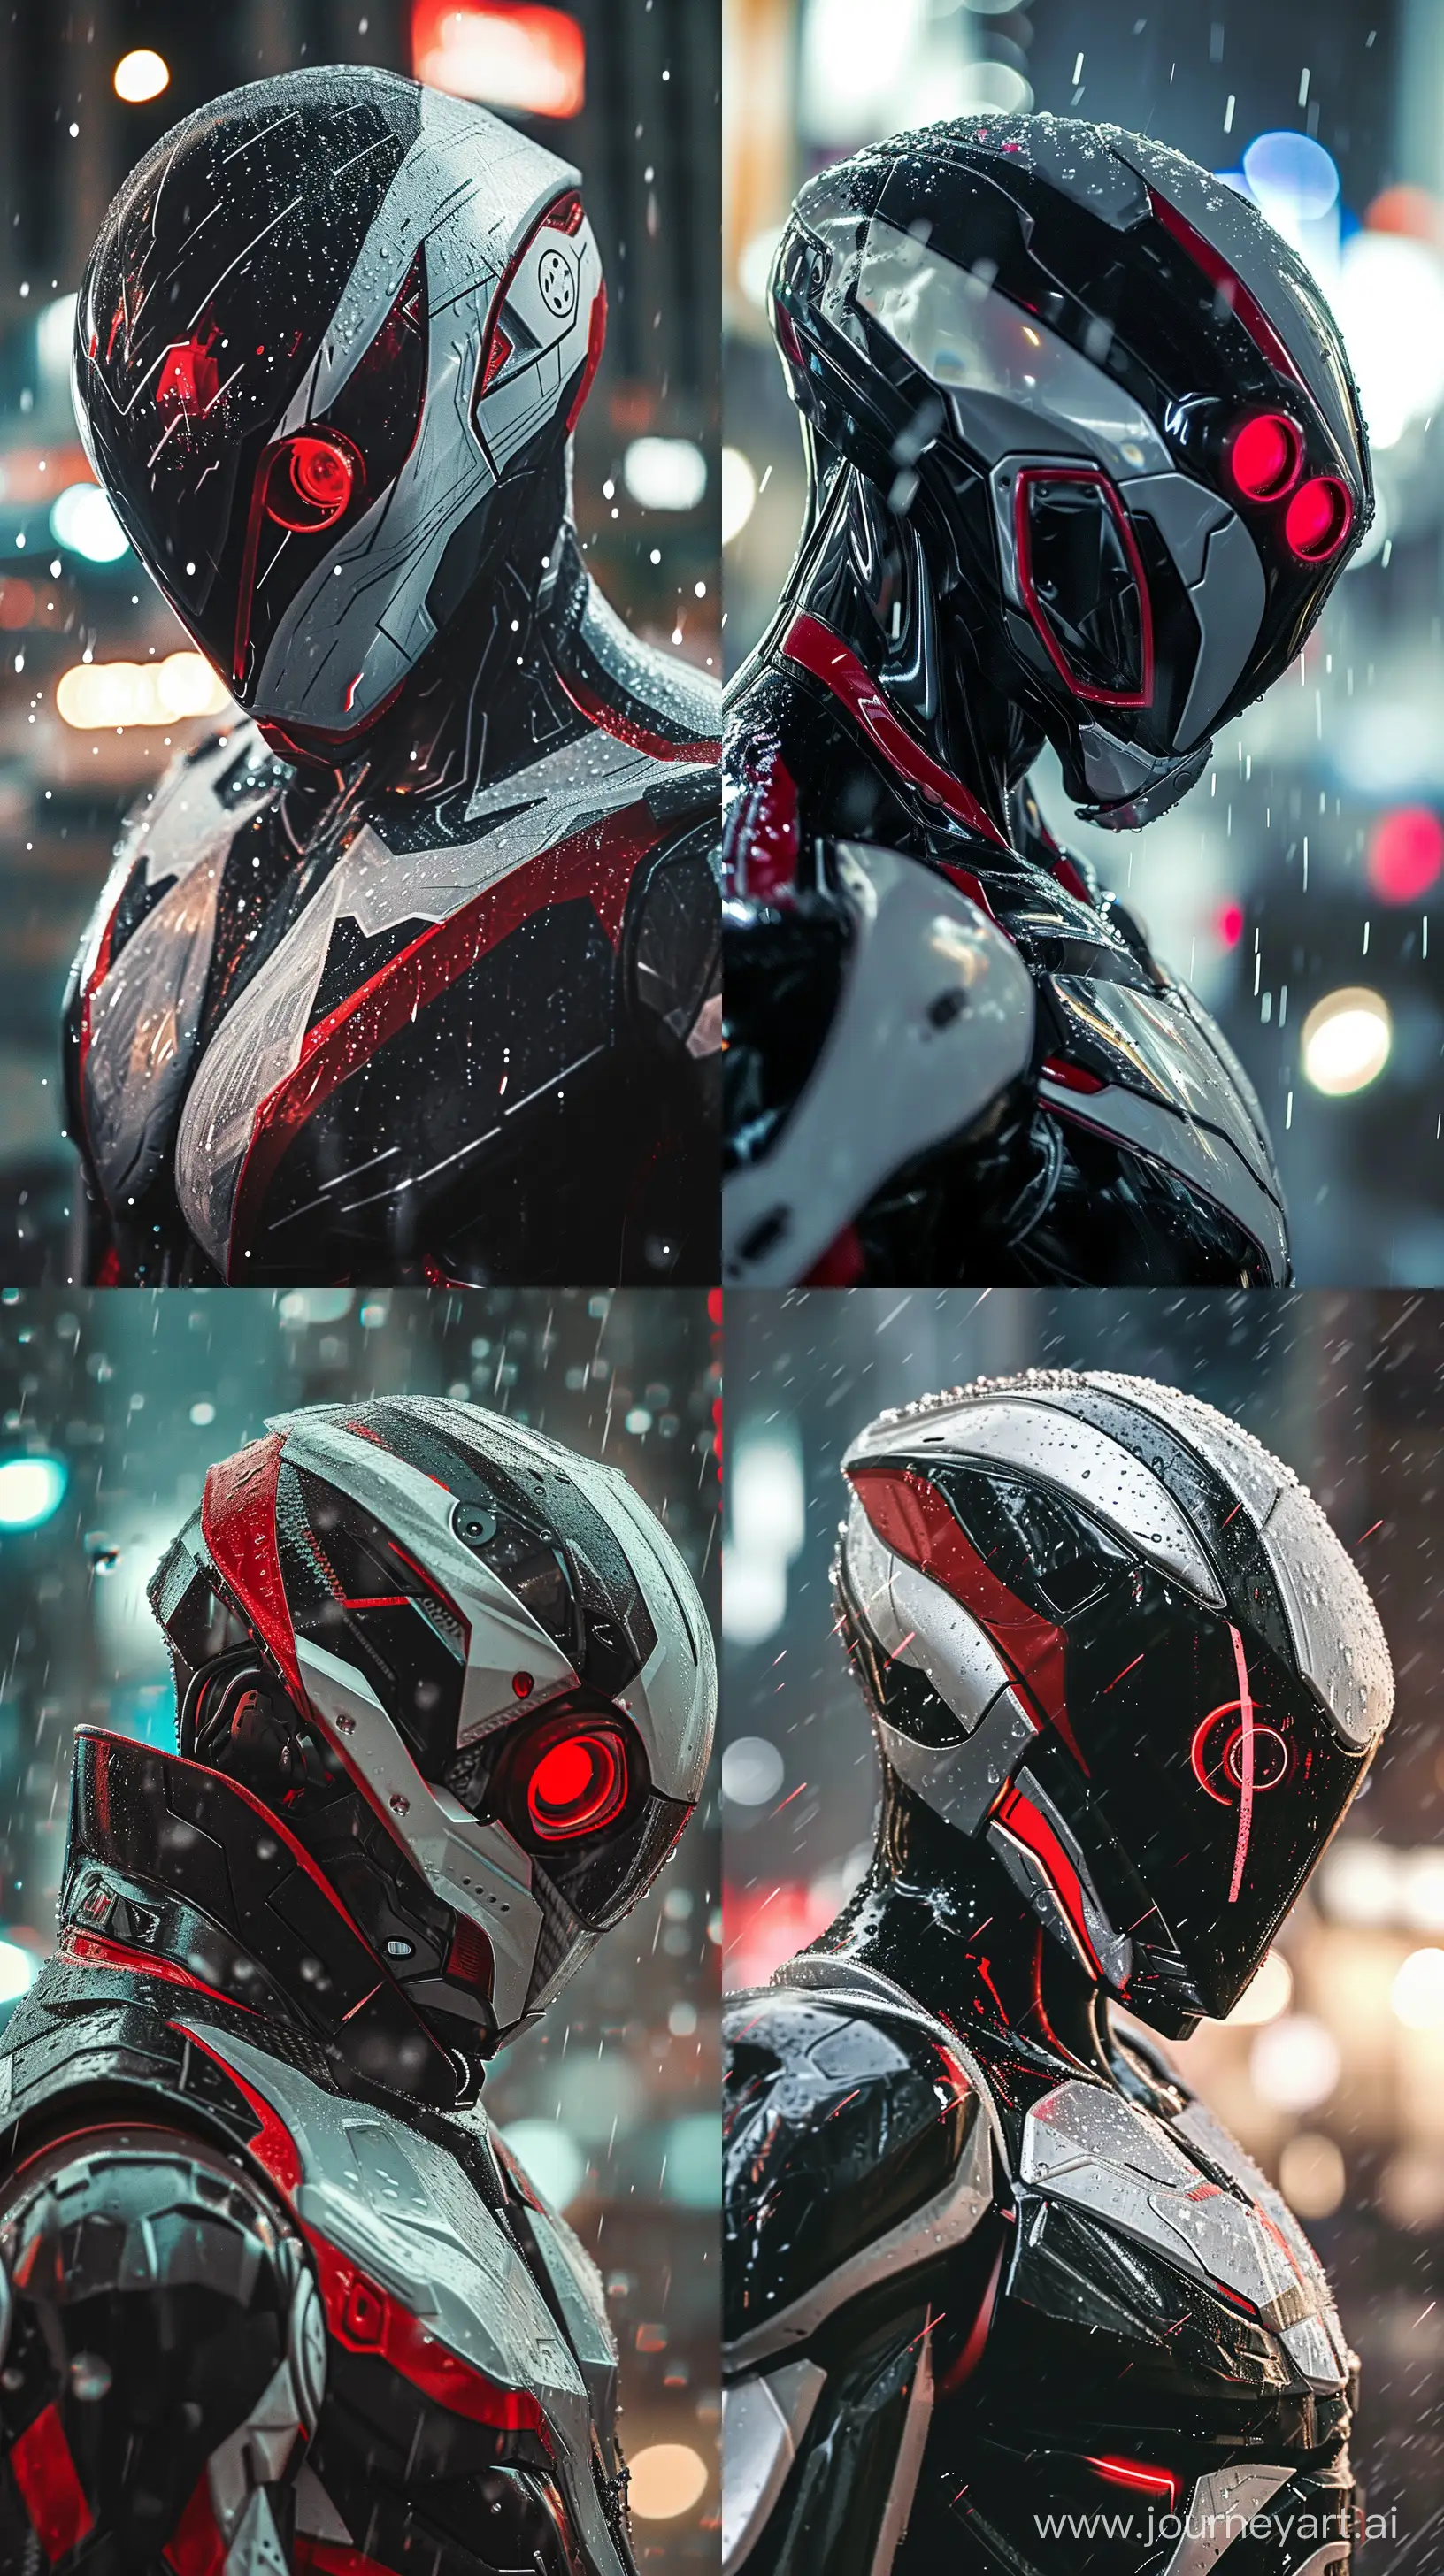 the photo shows a close-up of a humanoid robot or person in an advanced suit of armor. The design is sleek and modern, with red and white accents on a mostly black and gray base. It appears to be raining, as water droplets can be seen on the surface of the armor, the subject is either a robot or a person in a futuristic suit of armor, characterized by its sleek shape and intricate details, the helmet has red, viewfinder-like eyes, giving it an intense and focused look, water droplets can be seen on the surface, indicating that it is raining, in the background, blurred lights suggest an urban environment at night, the armor is highly detailed, with lines and patterns that suggest advanced technology, --v 6 --ar 9:16